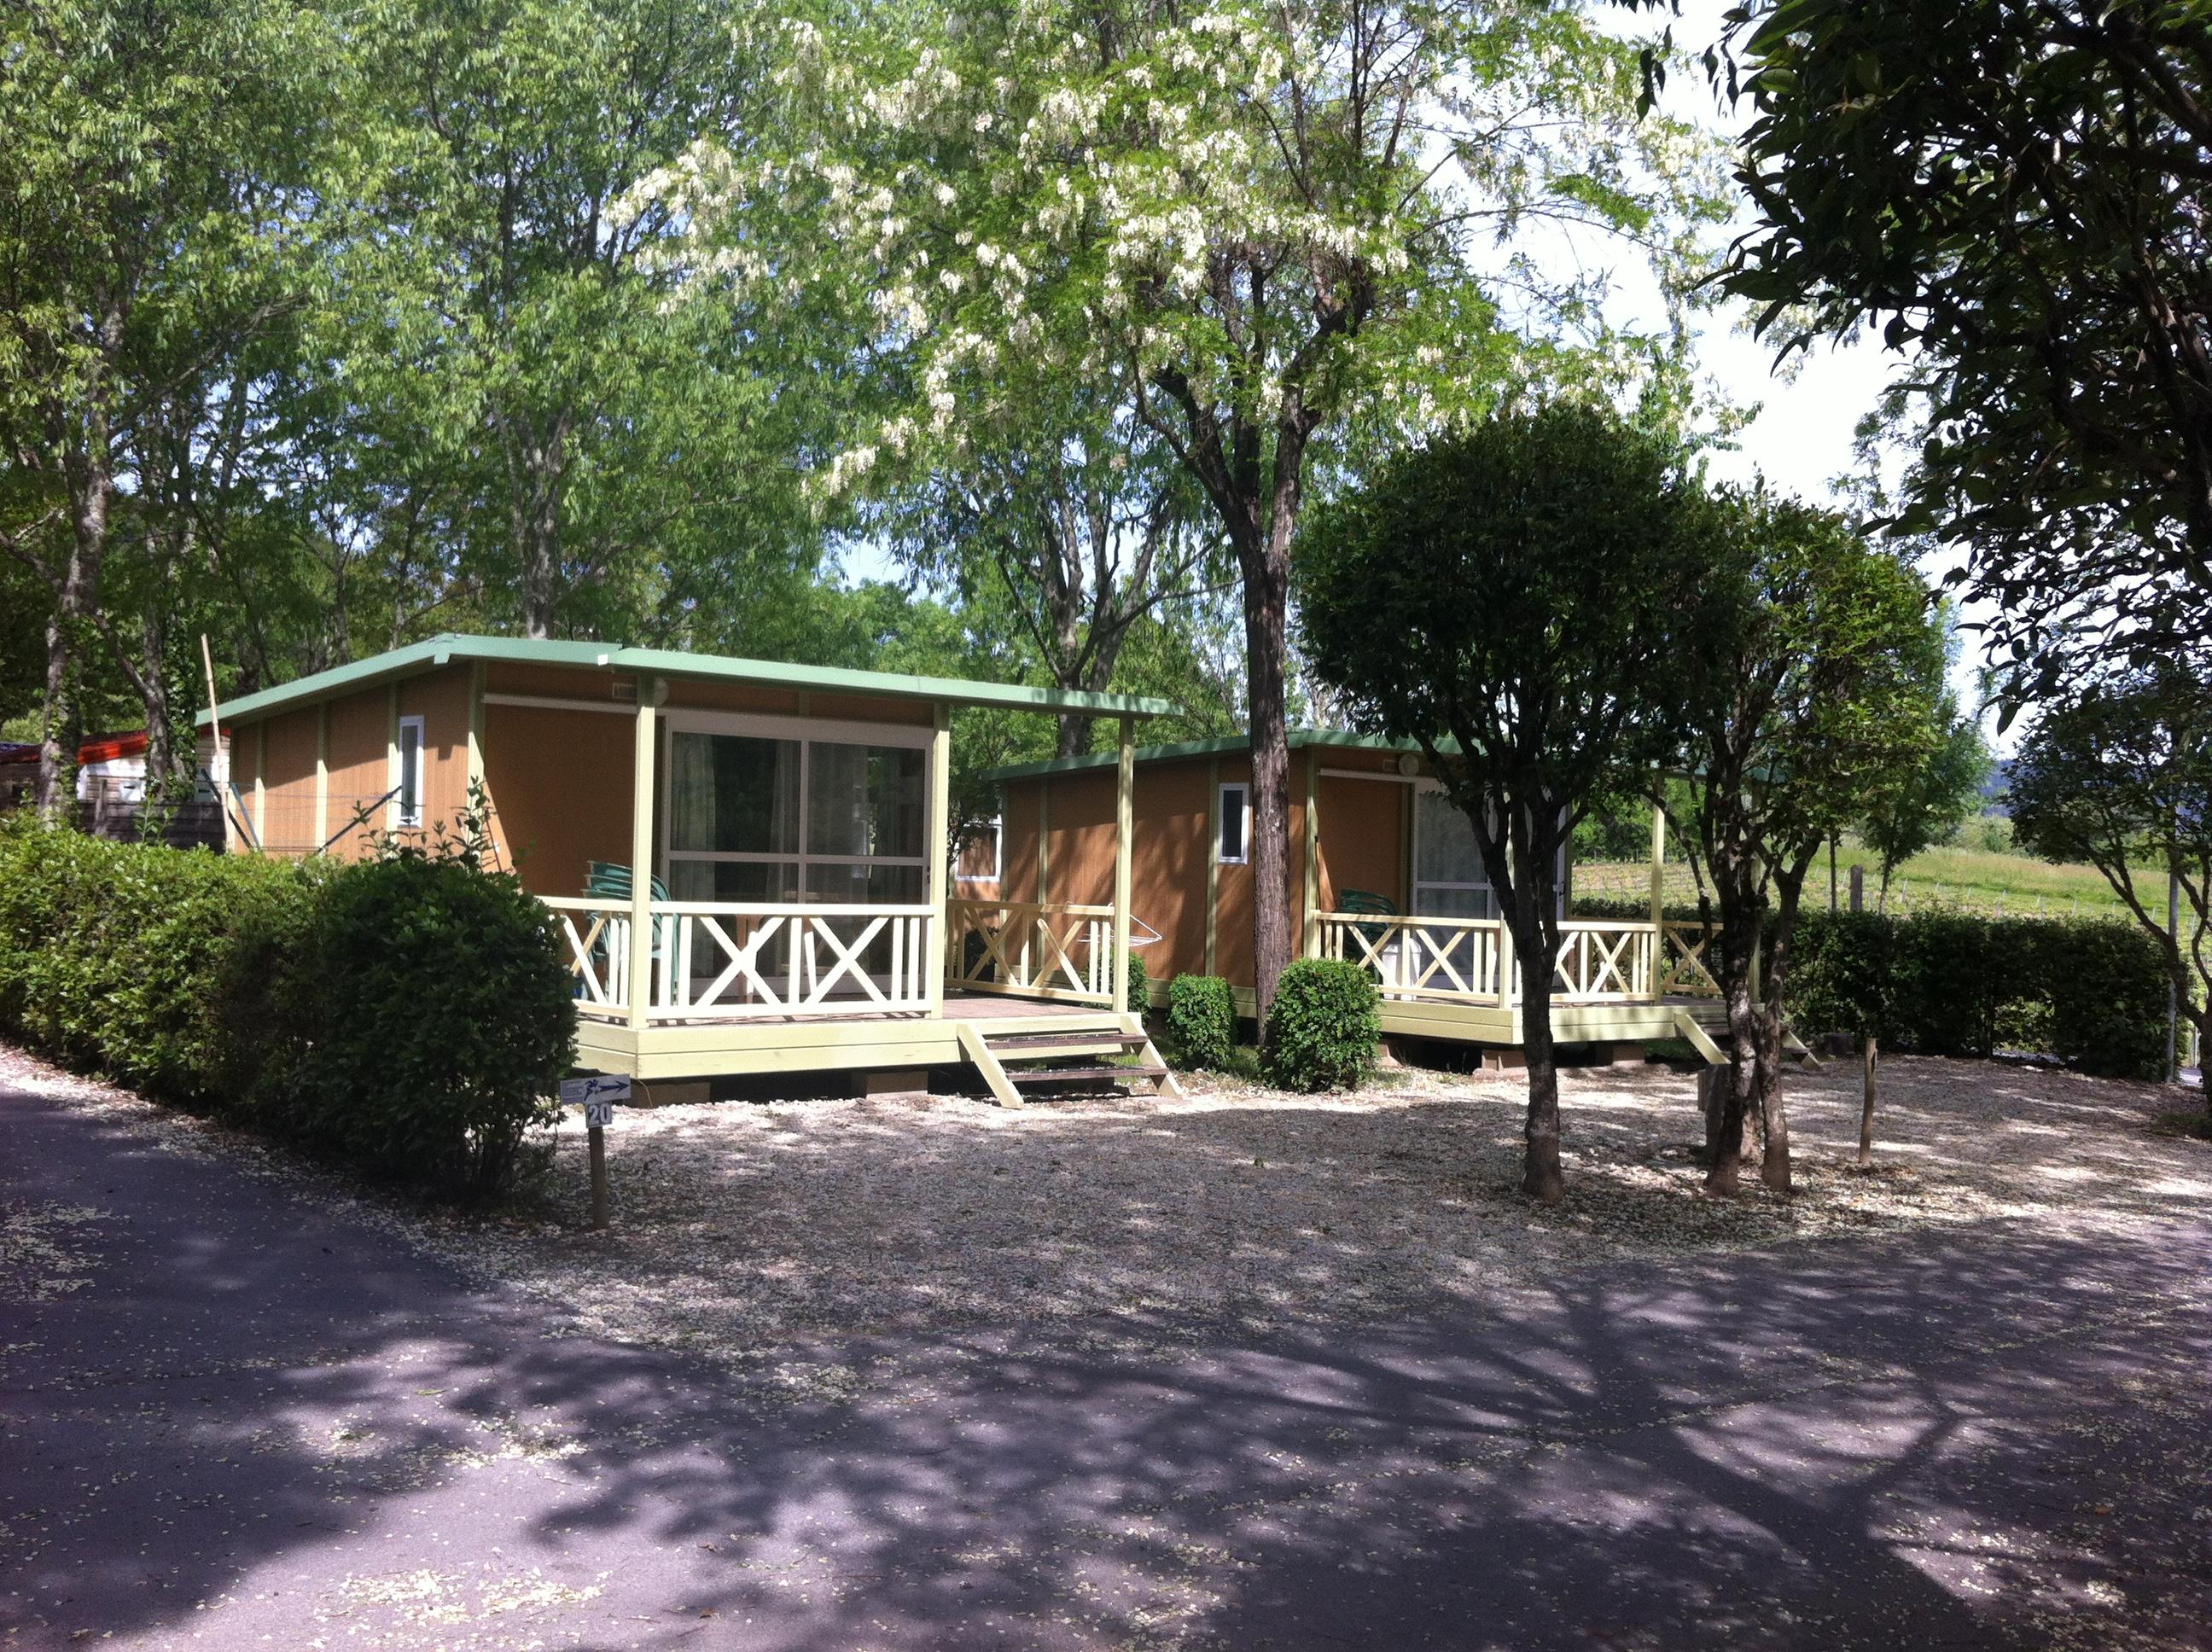 Huuraccommodatie - Chalet Gitotel Met Airconditioning - Camping Le Pequelet